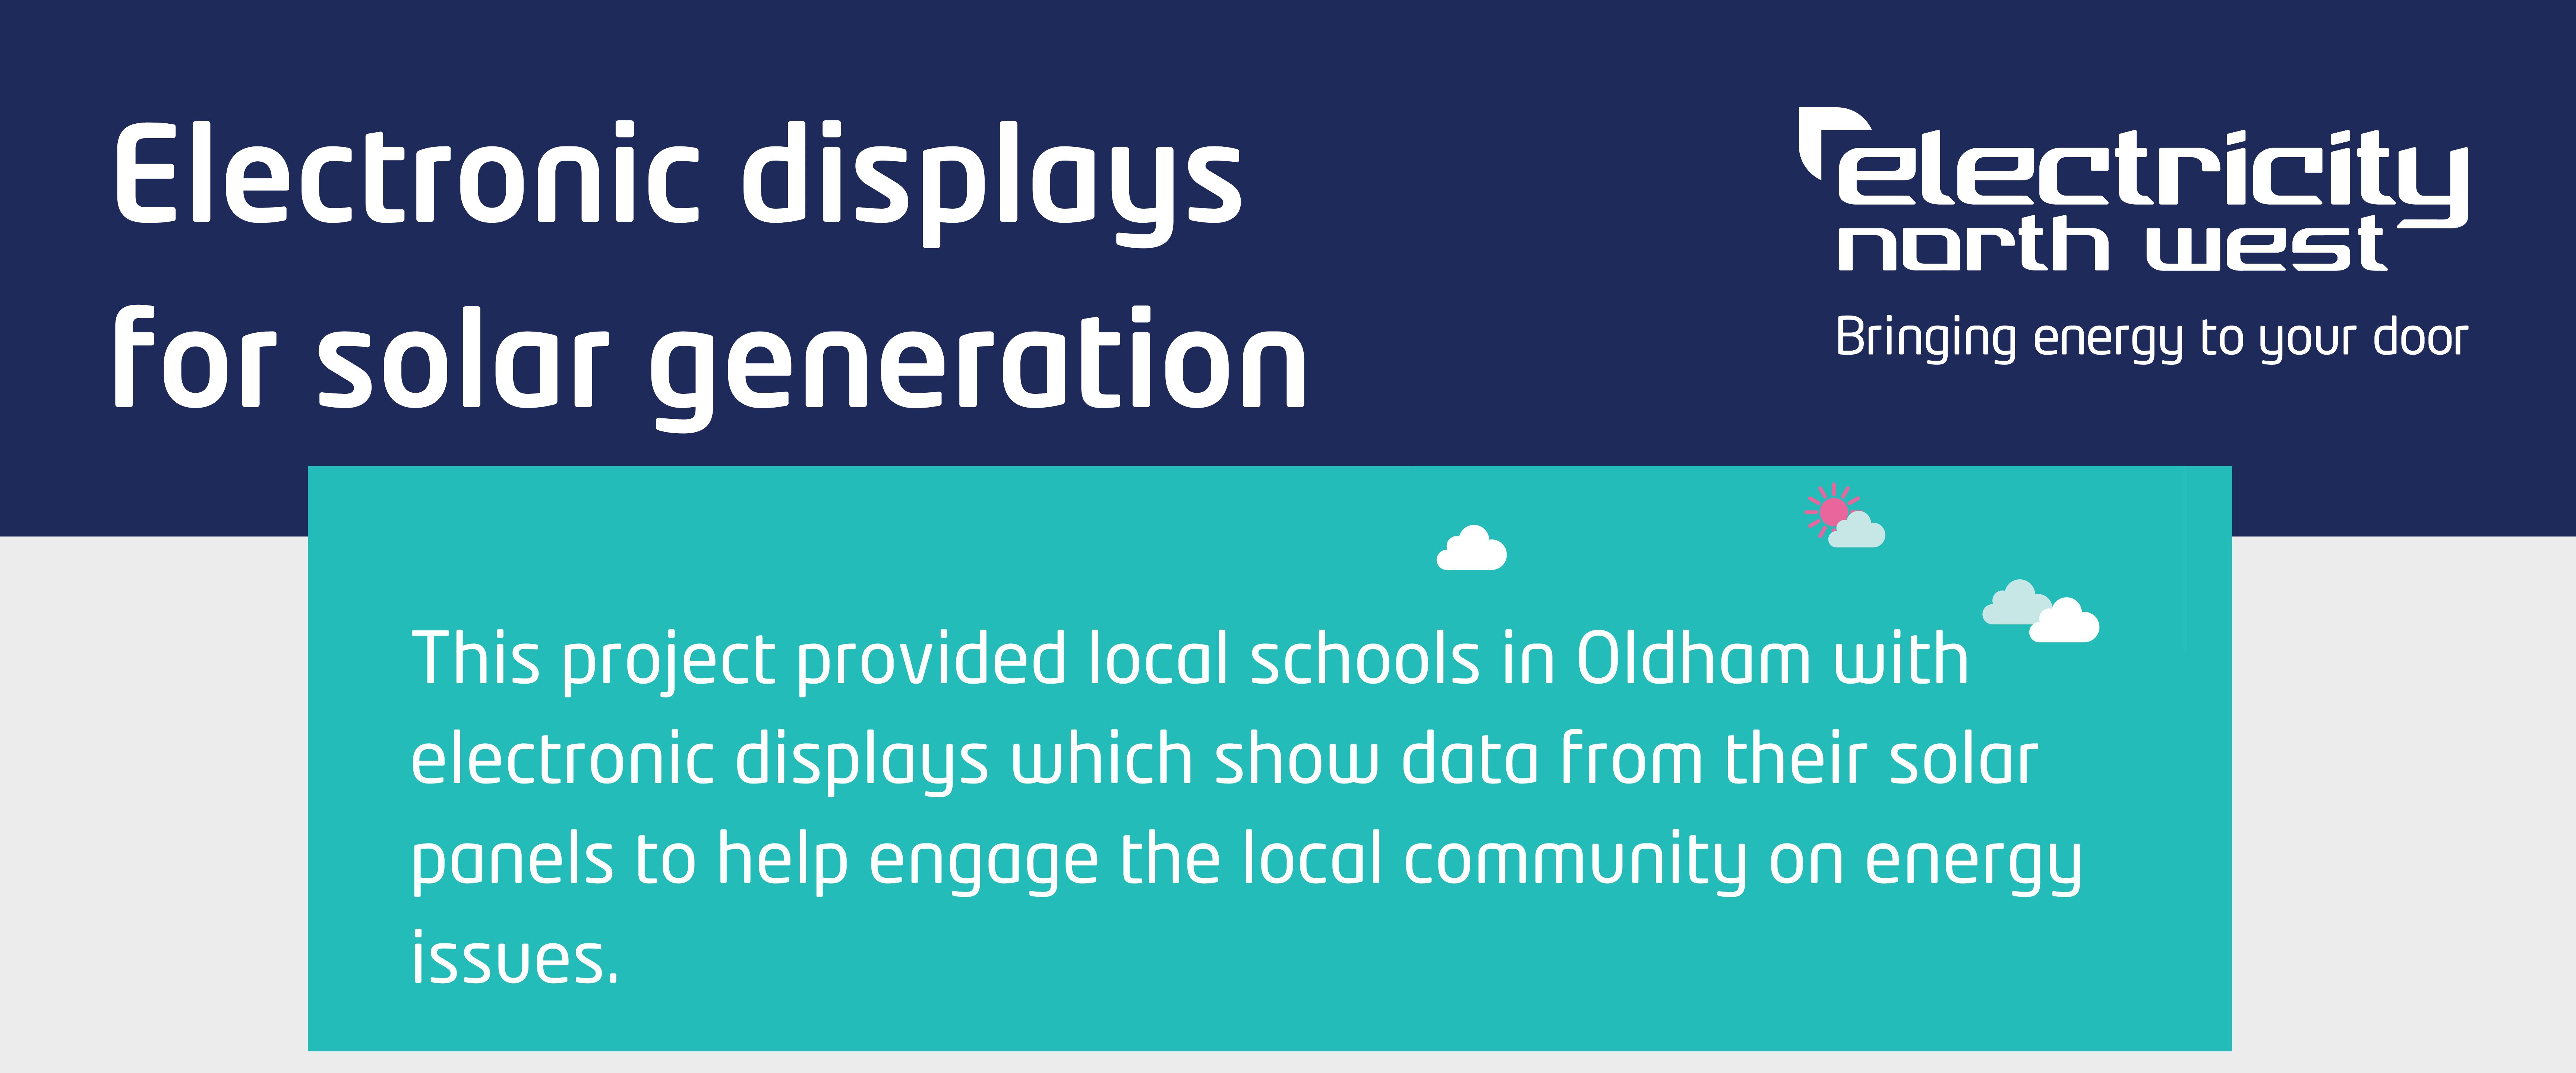 Electronic displays for solar generation in Schools in Oldham